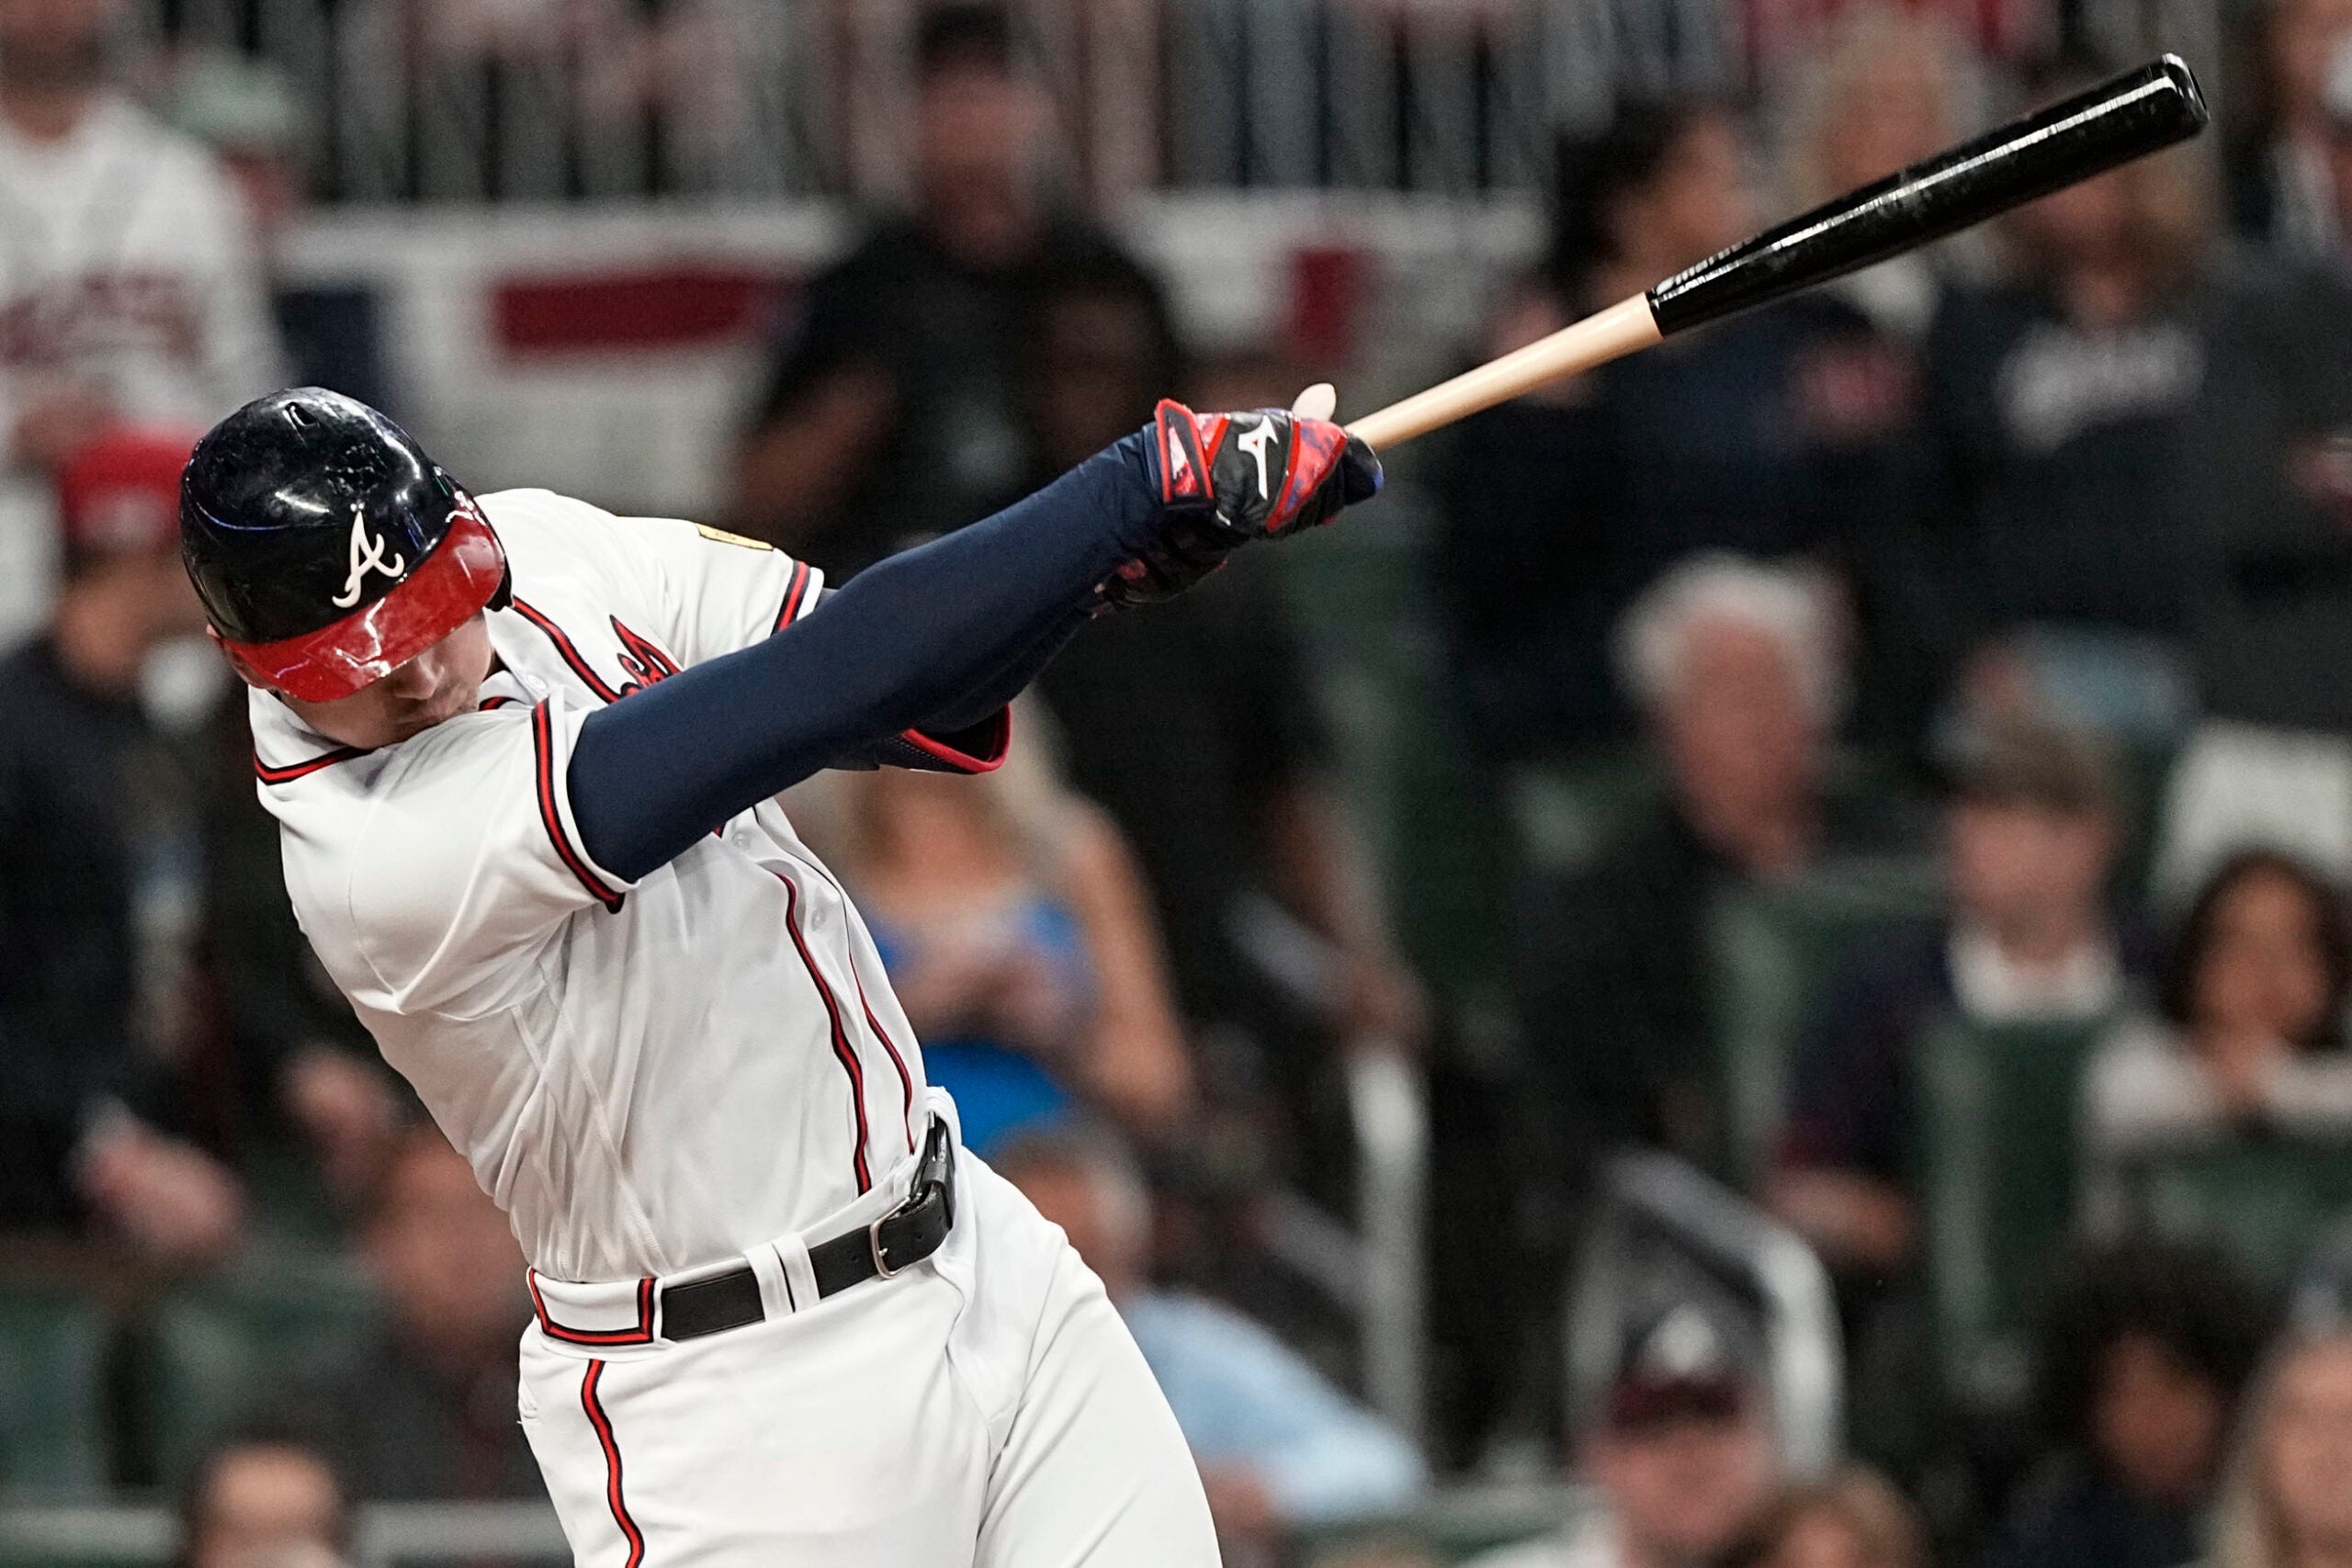 Olson's 2-run HR in 1st helps Braves overpower Red Sox 9-3